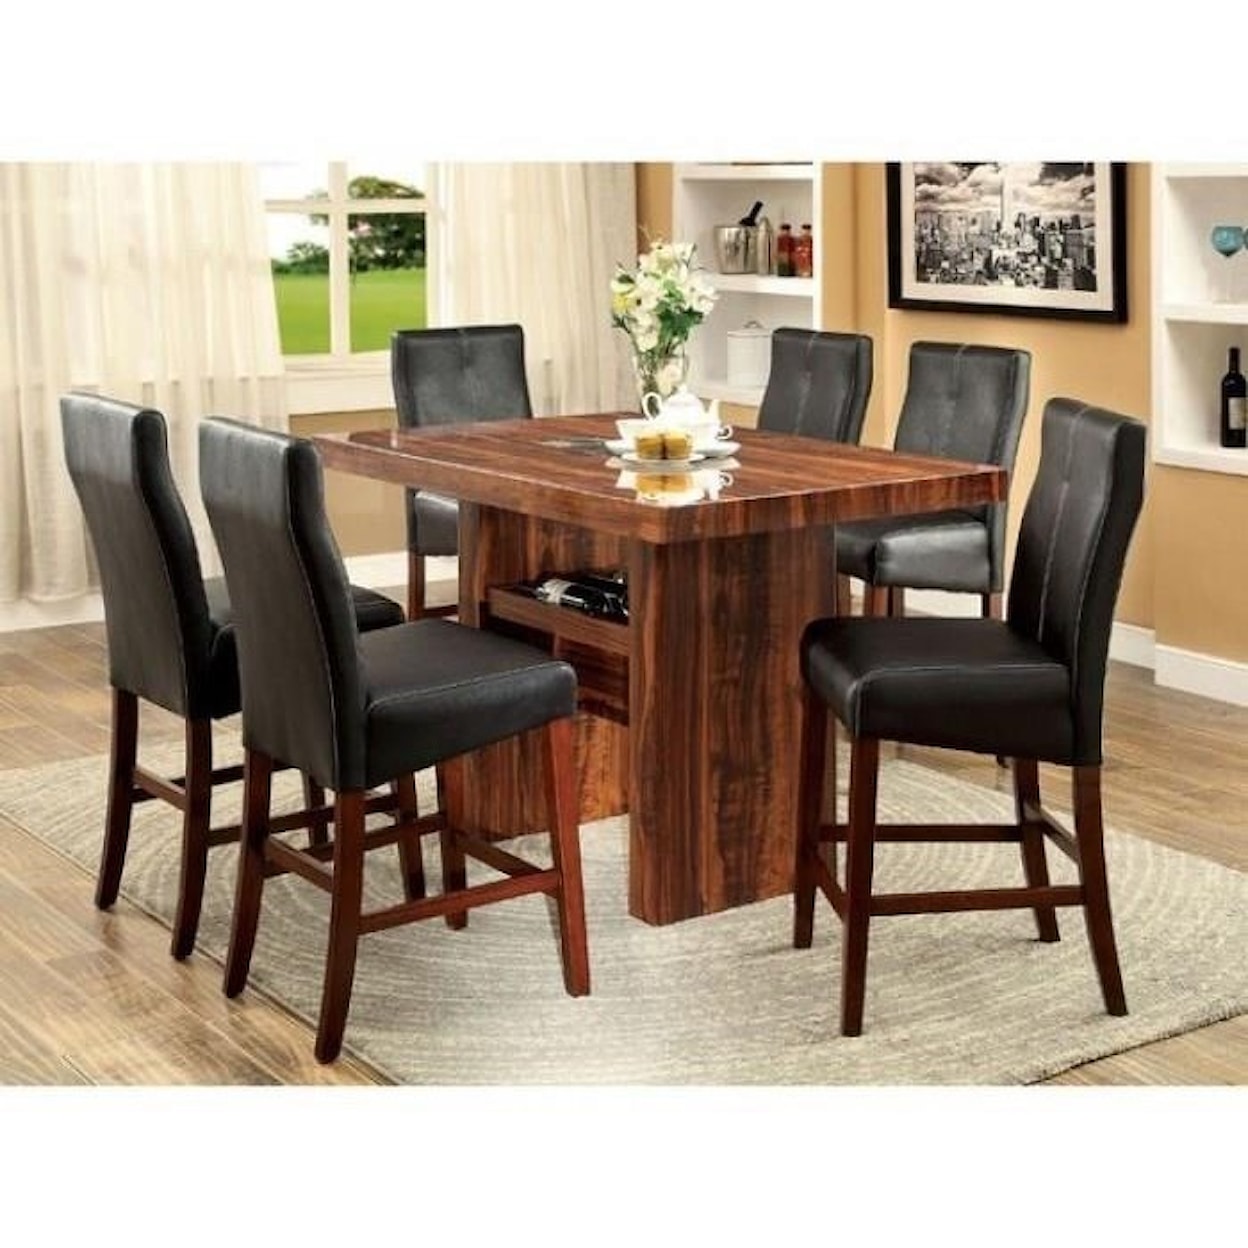 Furniture of America Bonneville II Table and Chair Set